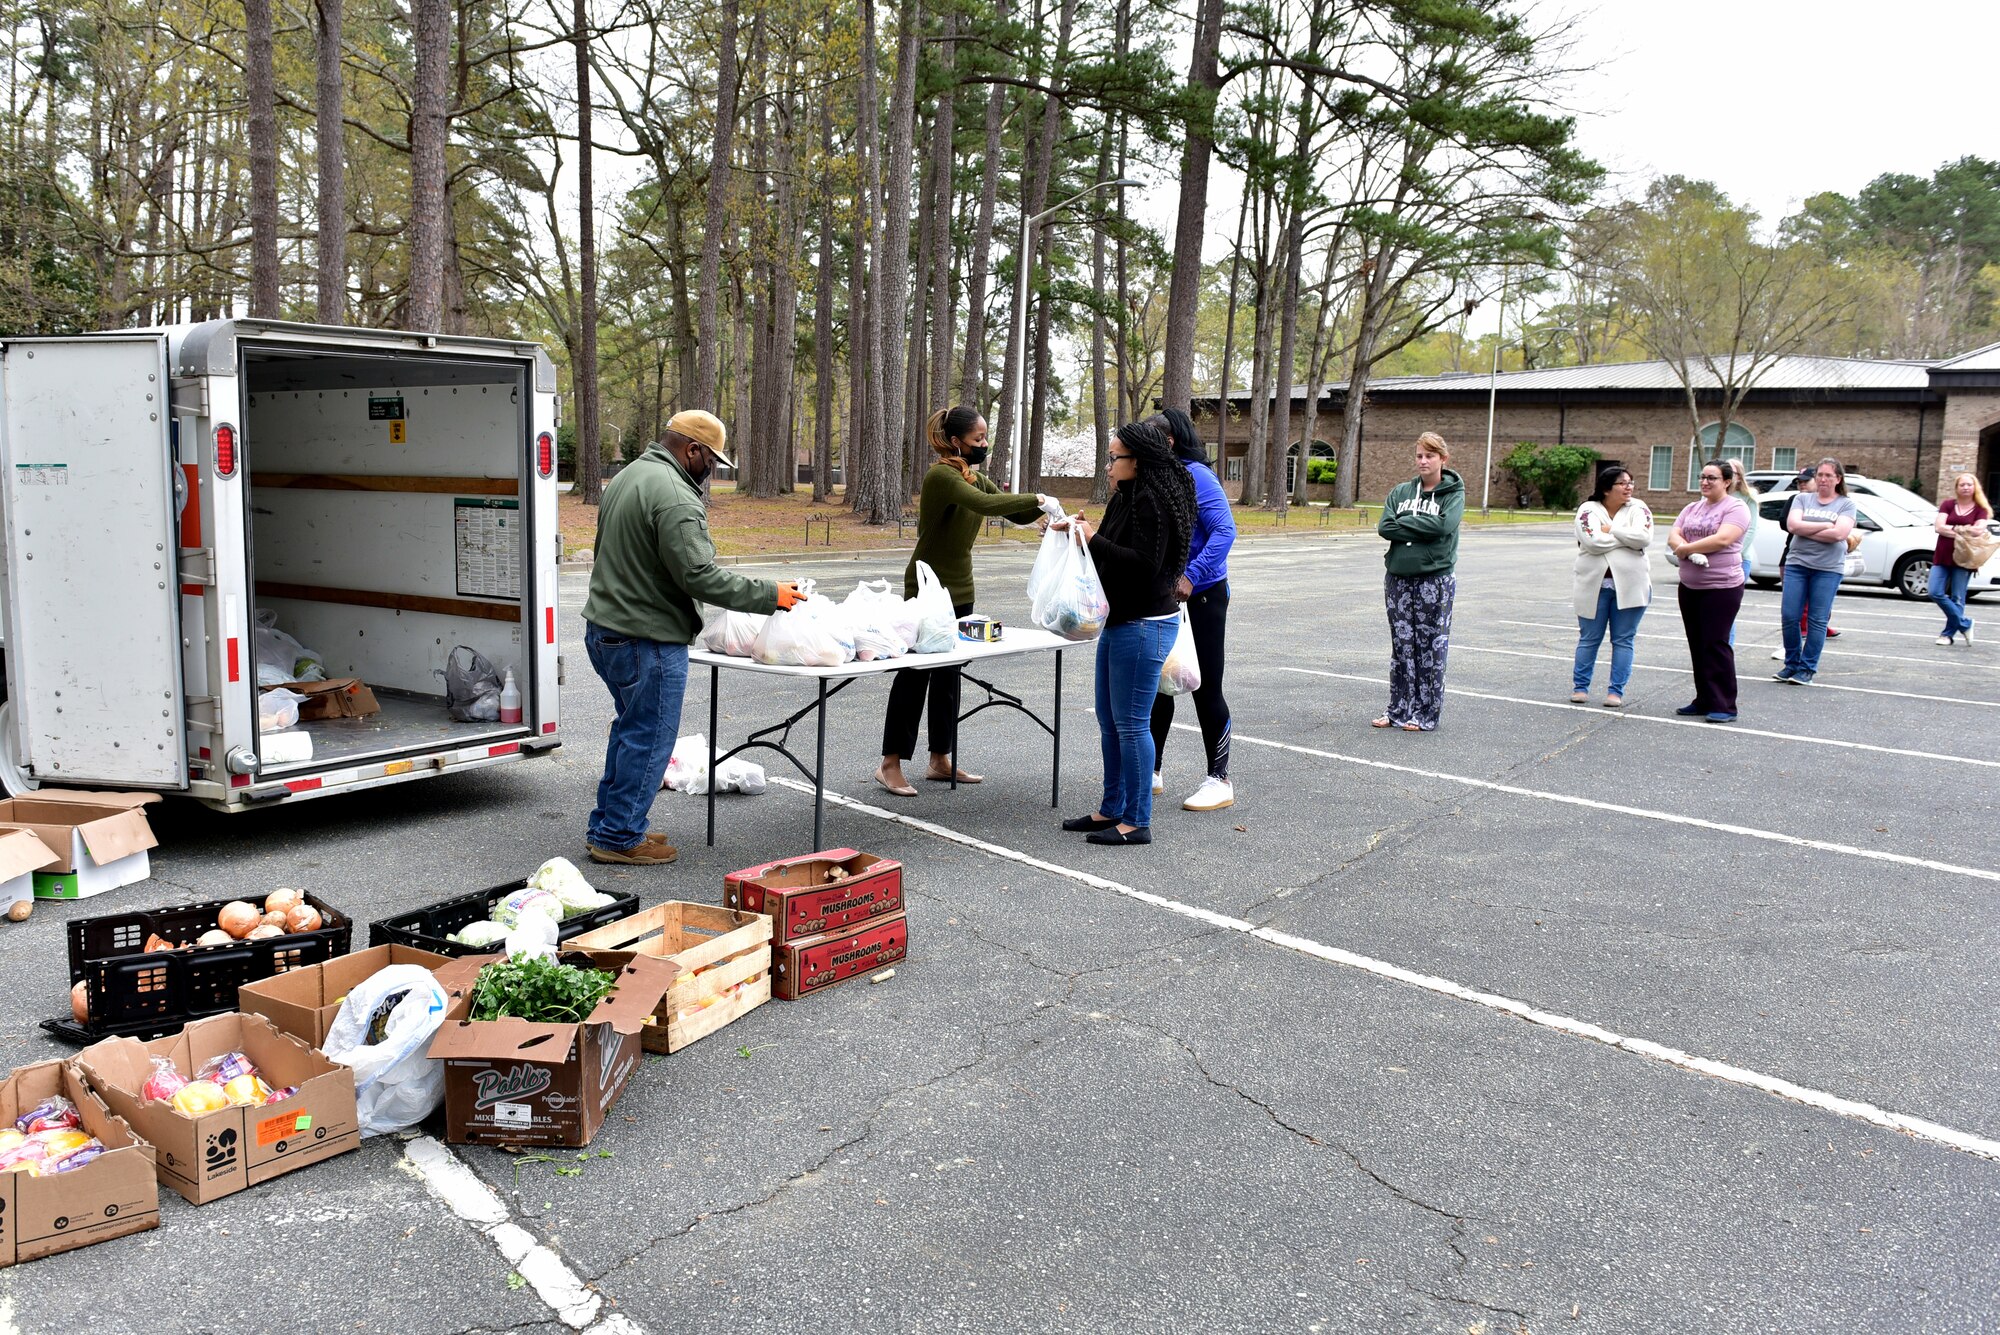 Customers pick-up produce during a bi-monthly produce run at Seymour Johnson Air Force Base, N.C. on March 22, 2020.